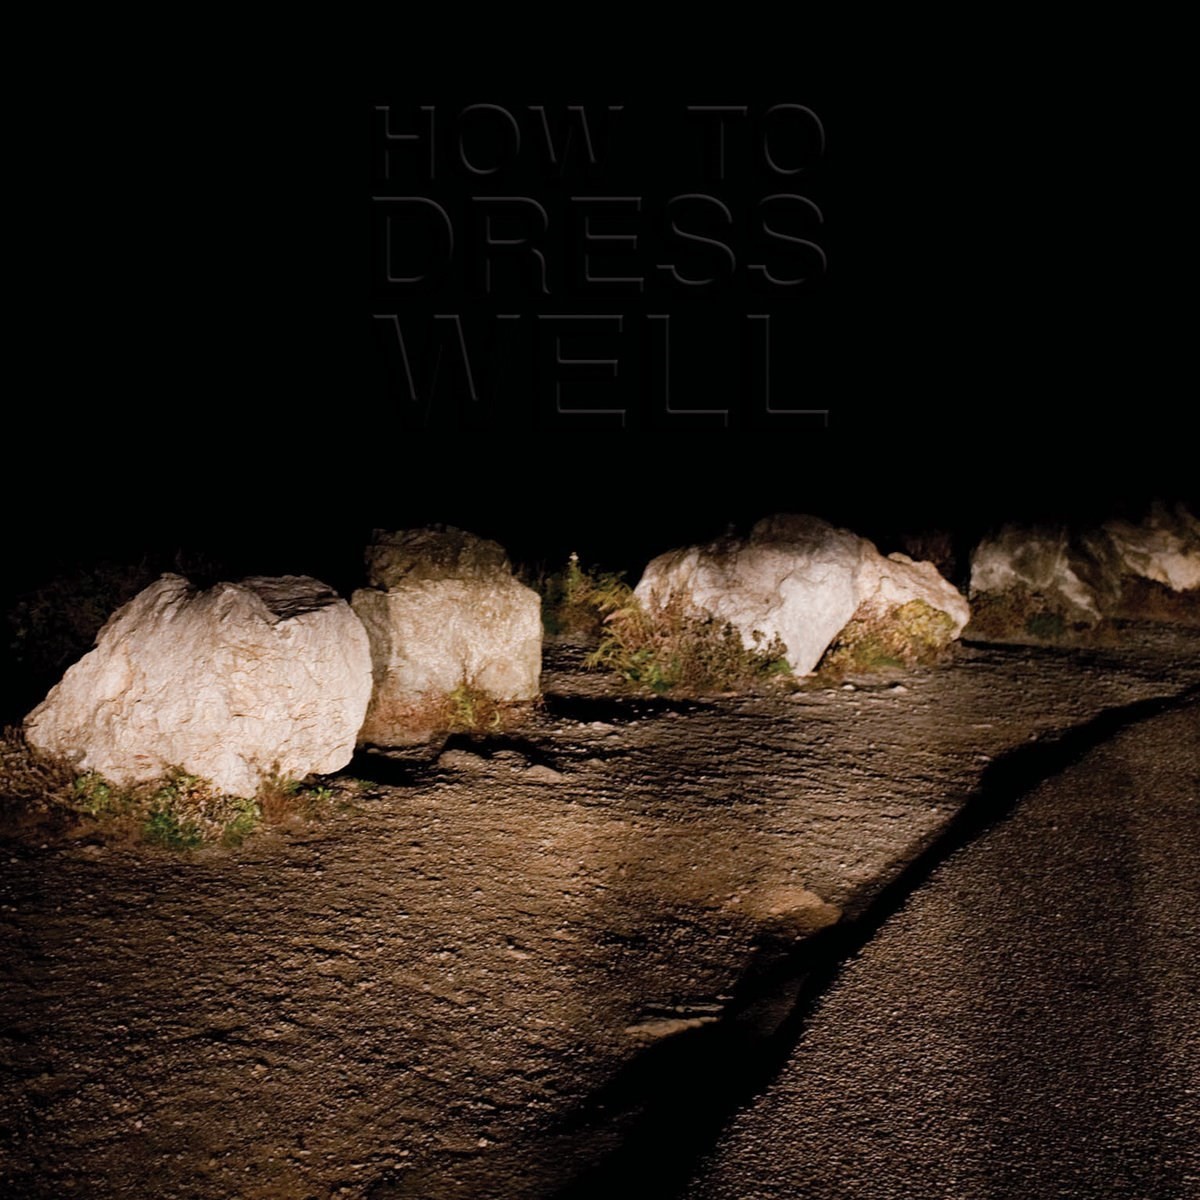 How To Dress Well – Love Remains (2010)